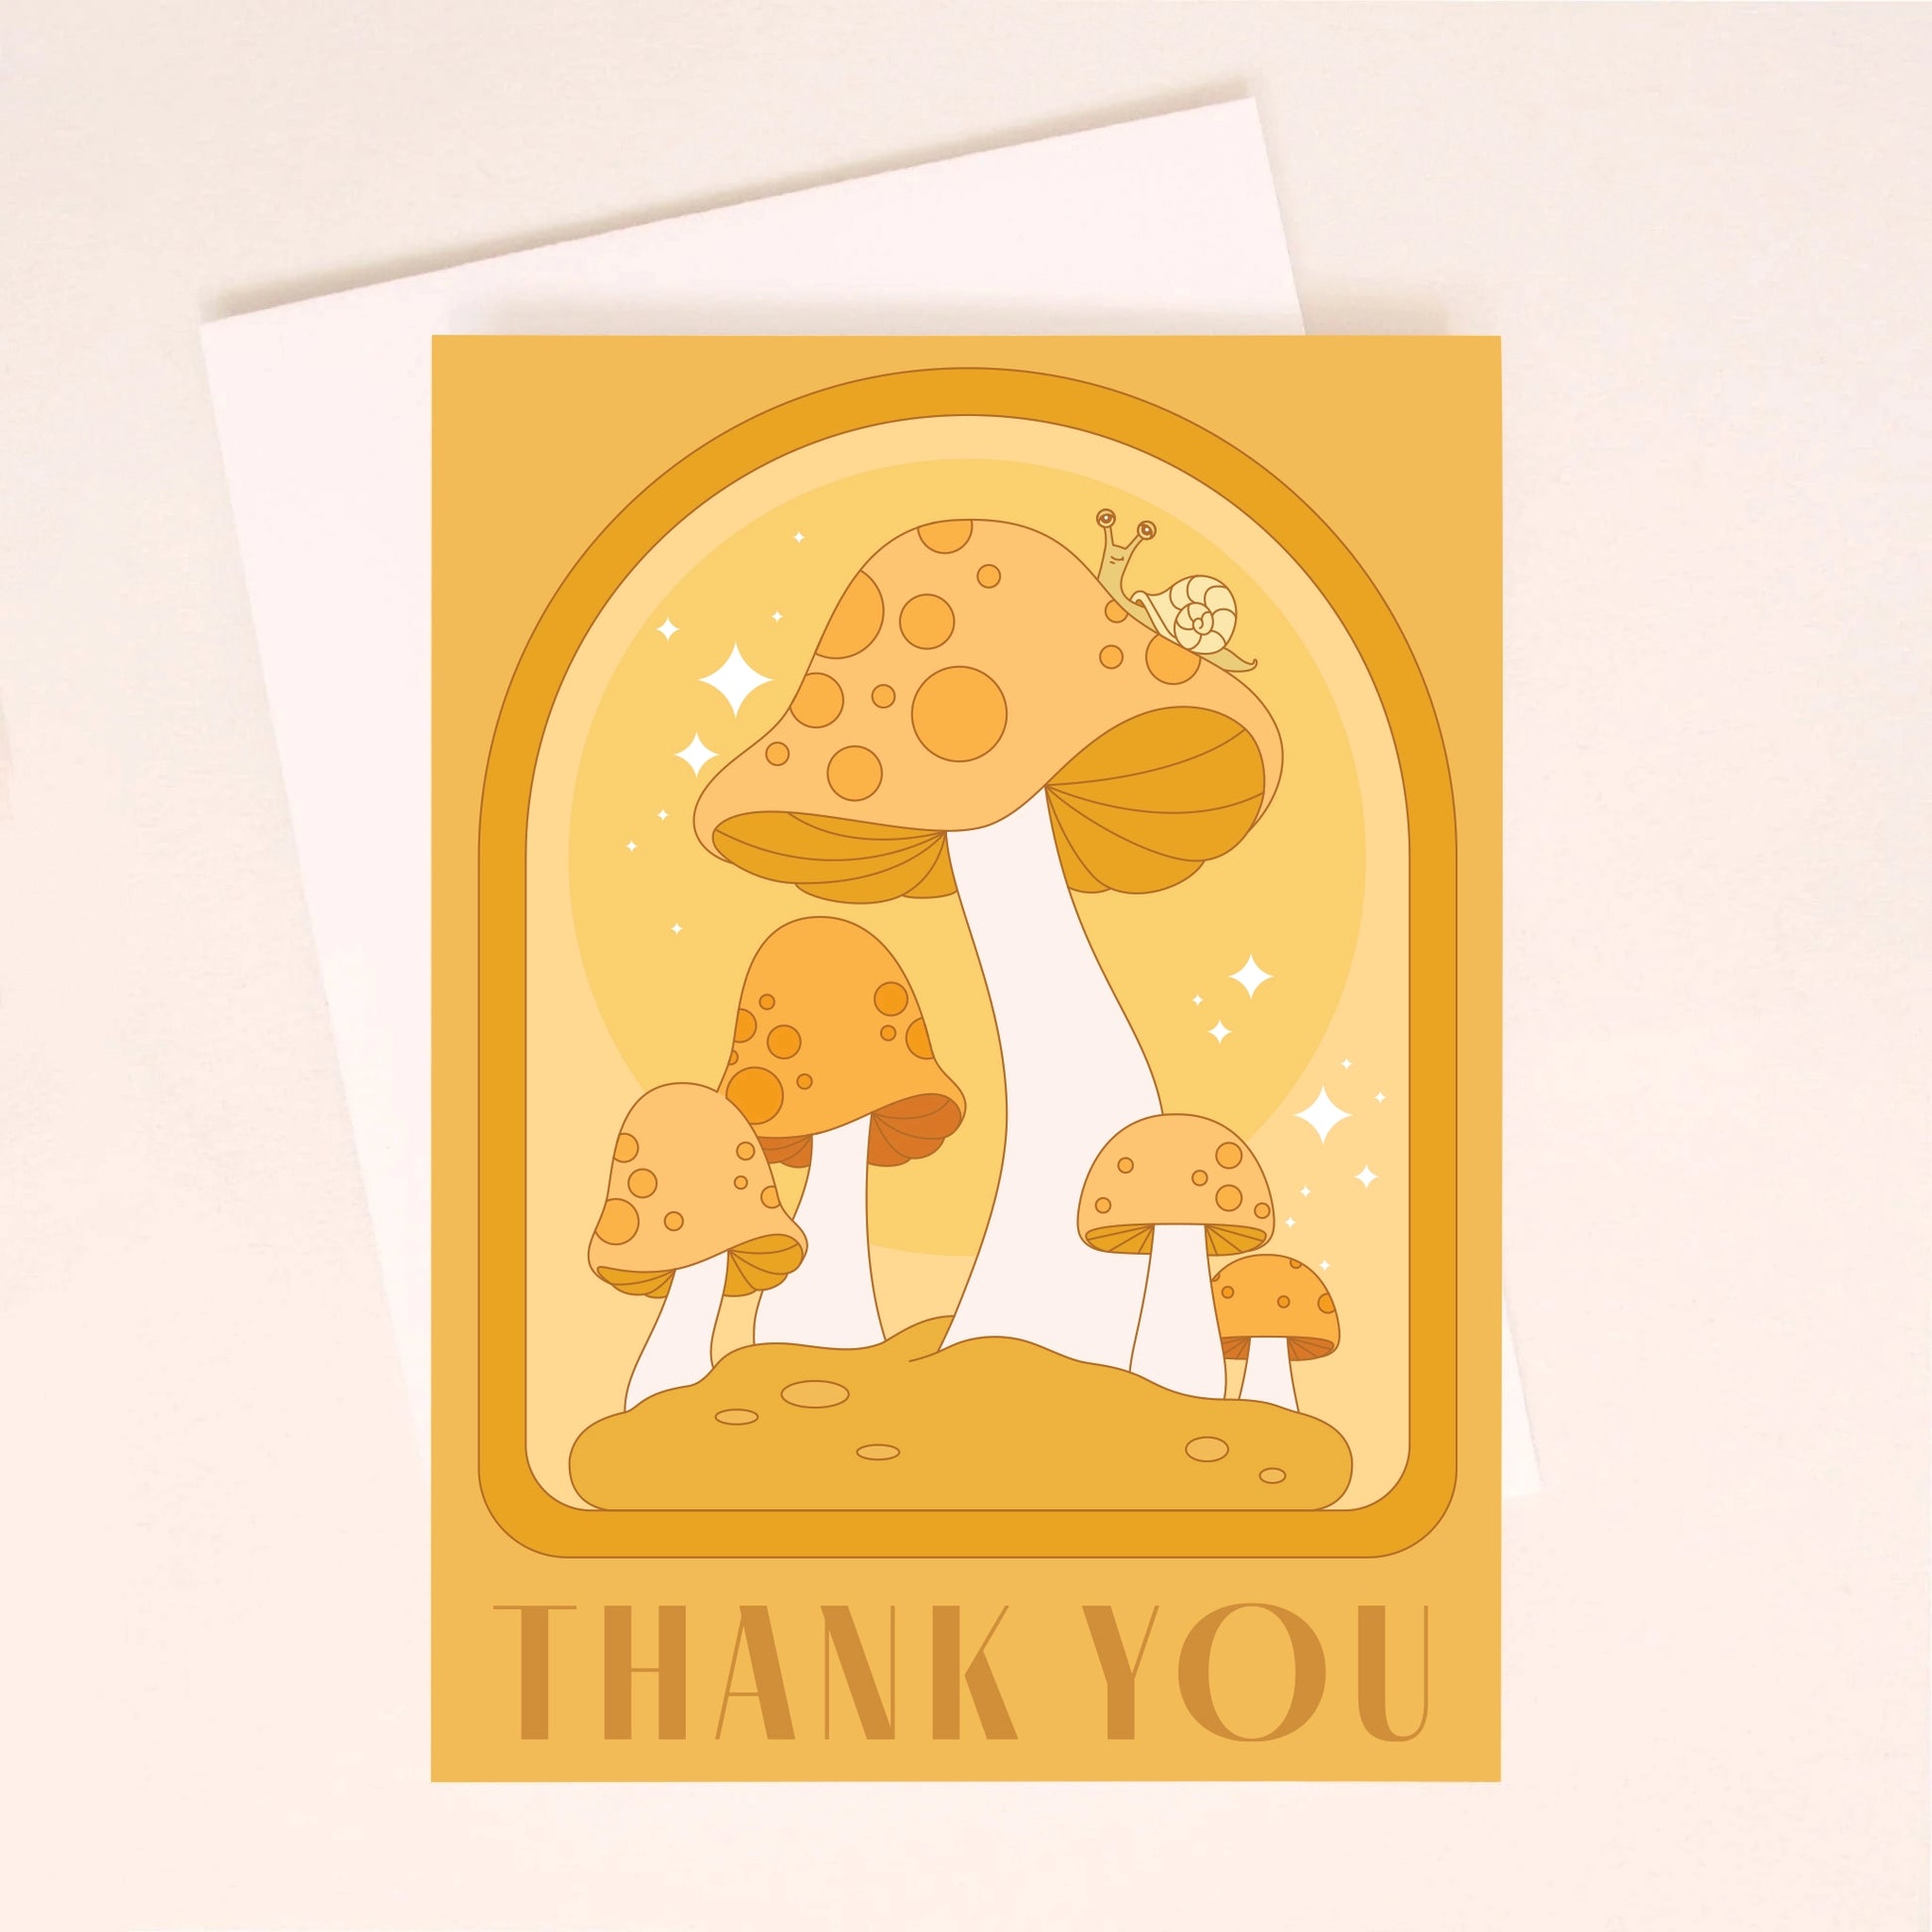 On an ivory background is an orange greeting card with an arched design, mushroom illustrations with a little snail on top of the largest one and text along the bottom that reads, "Thank You". 